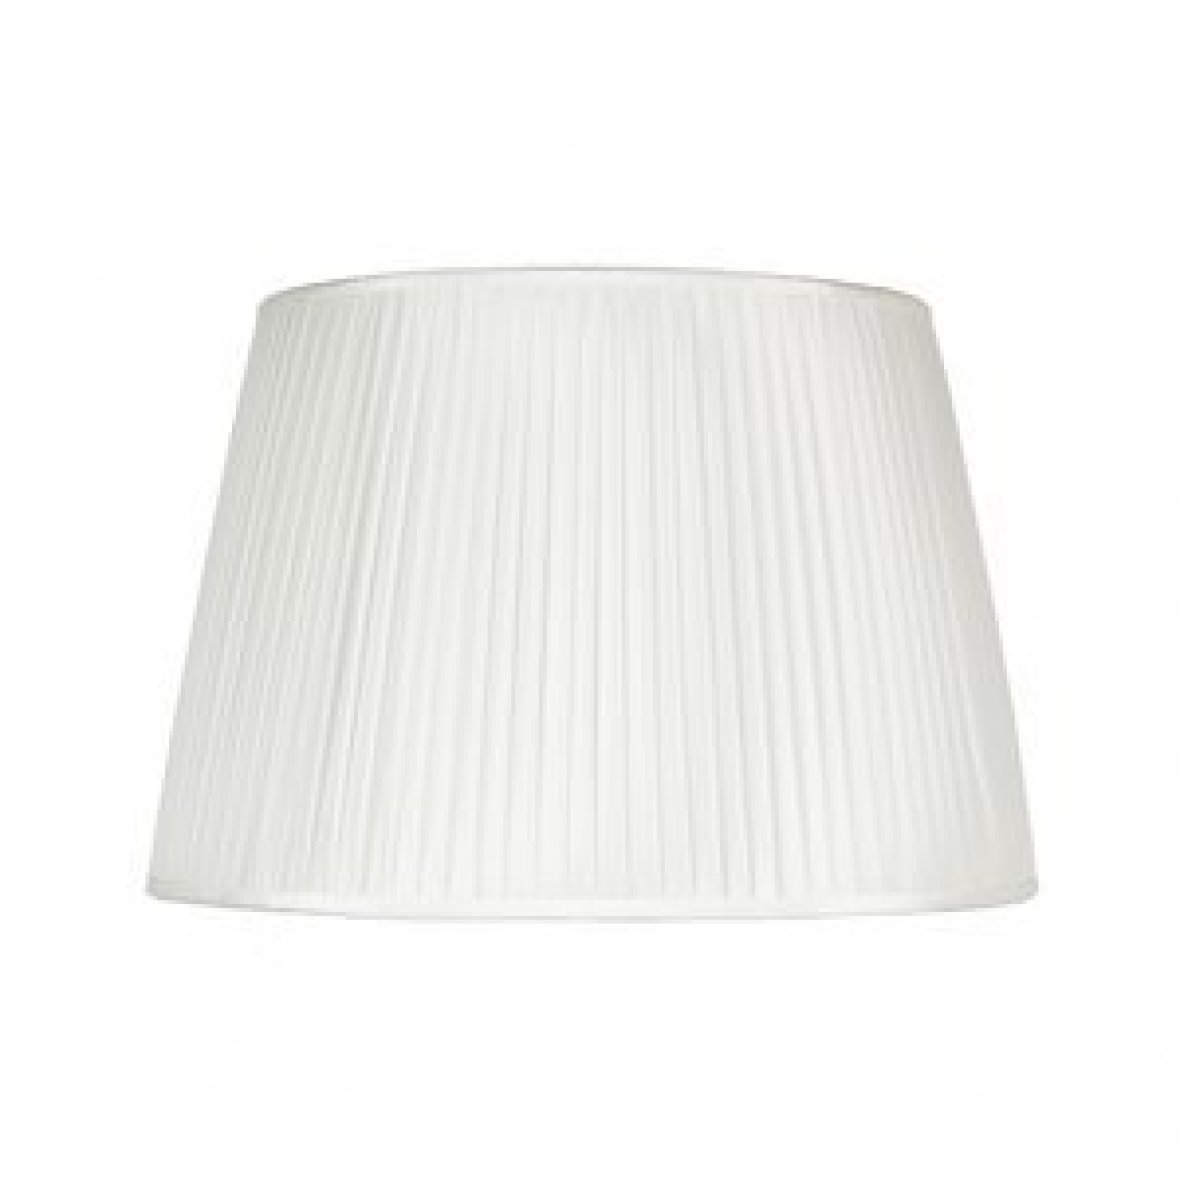 conical-pleated-lampshade-white